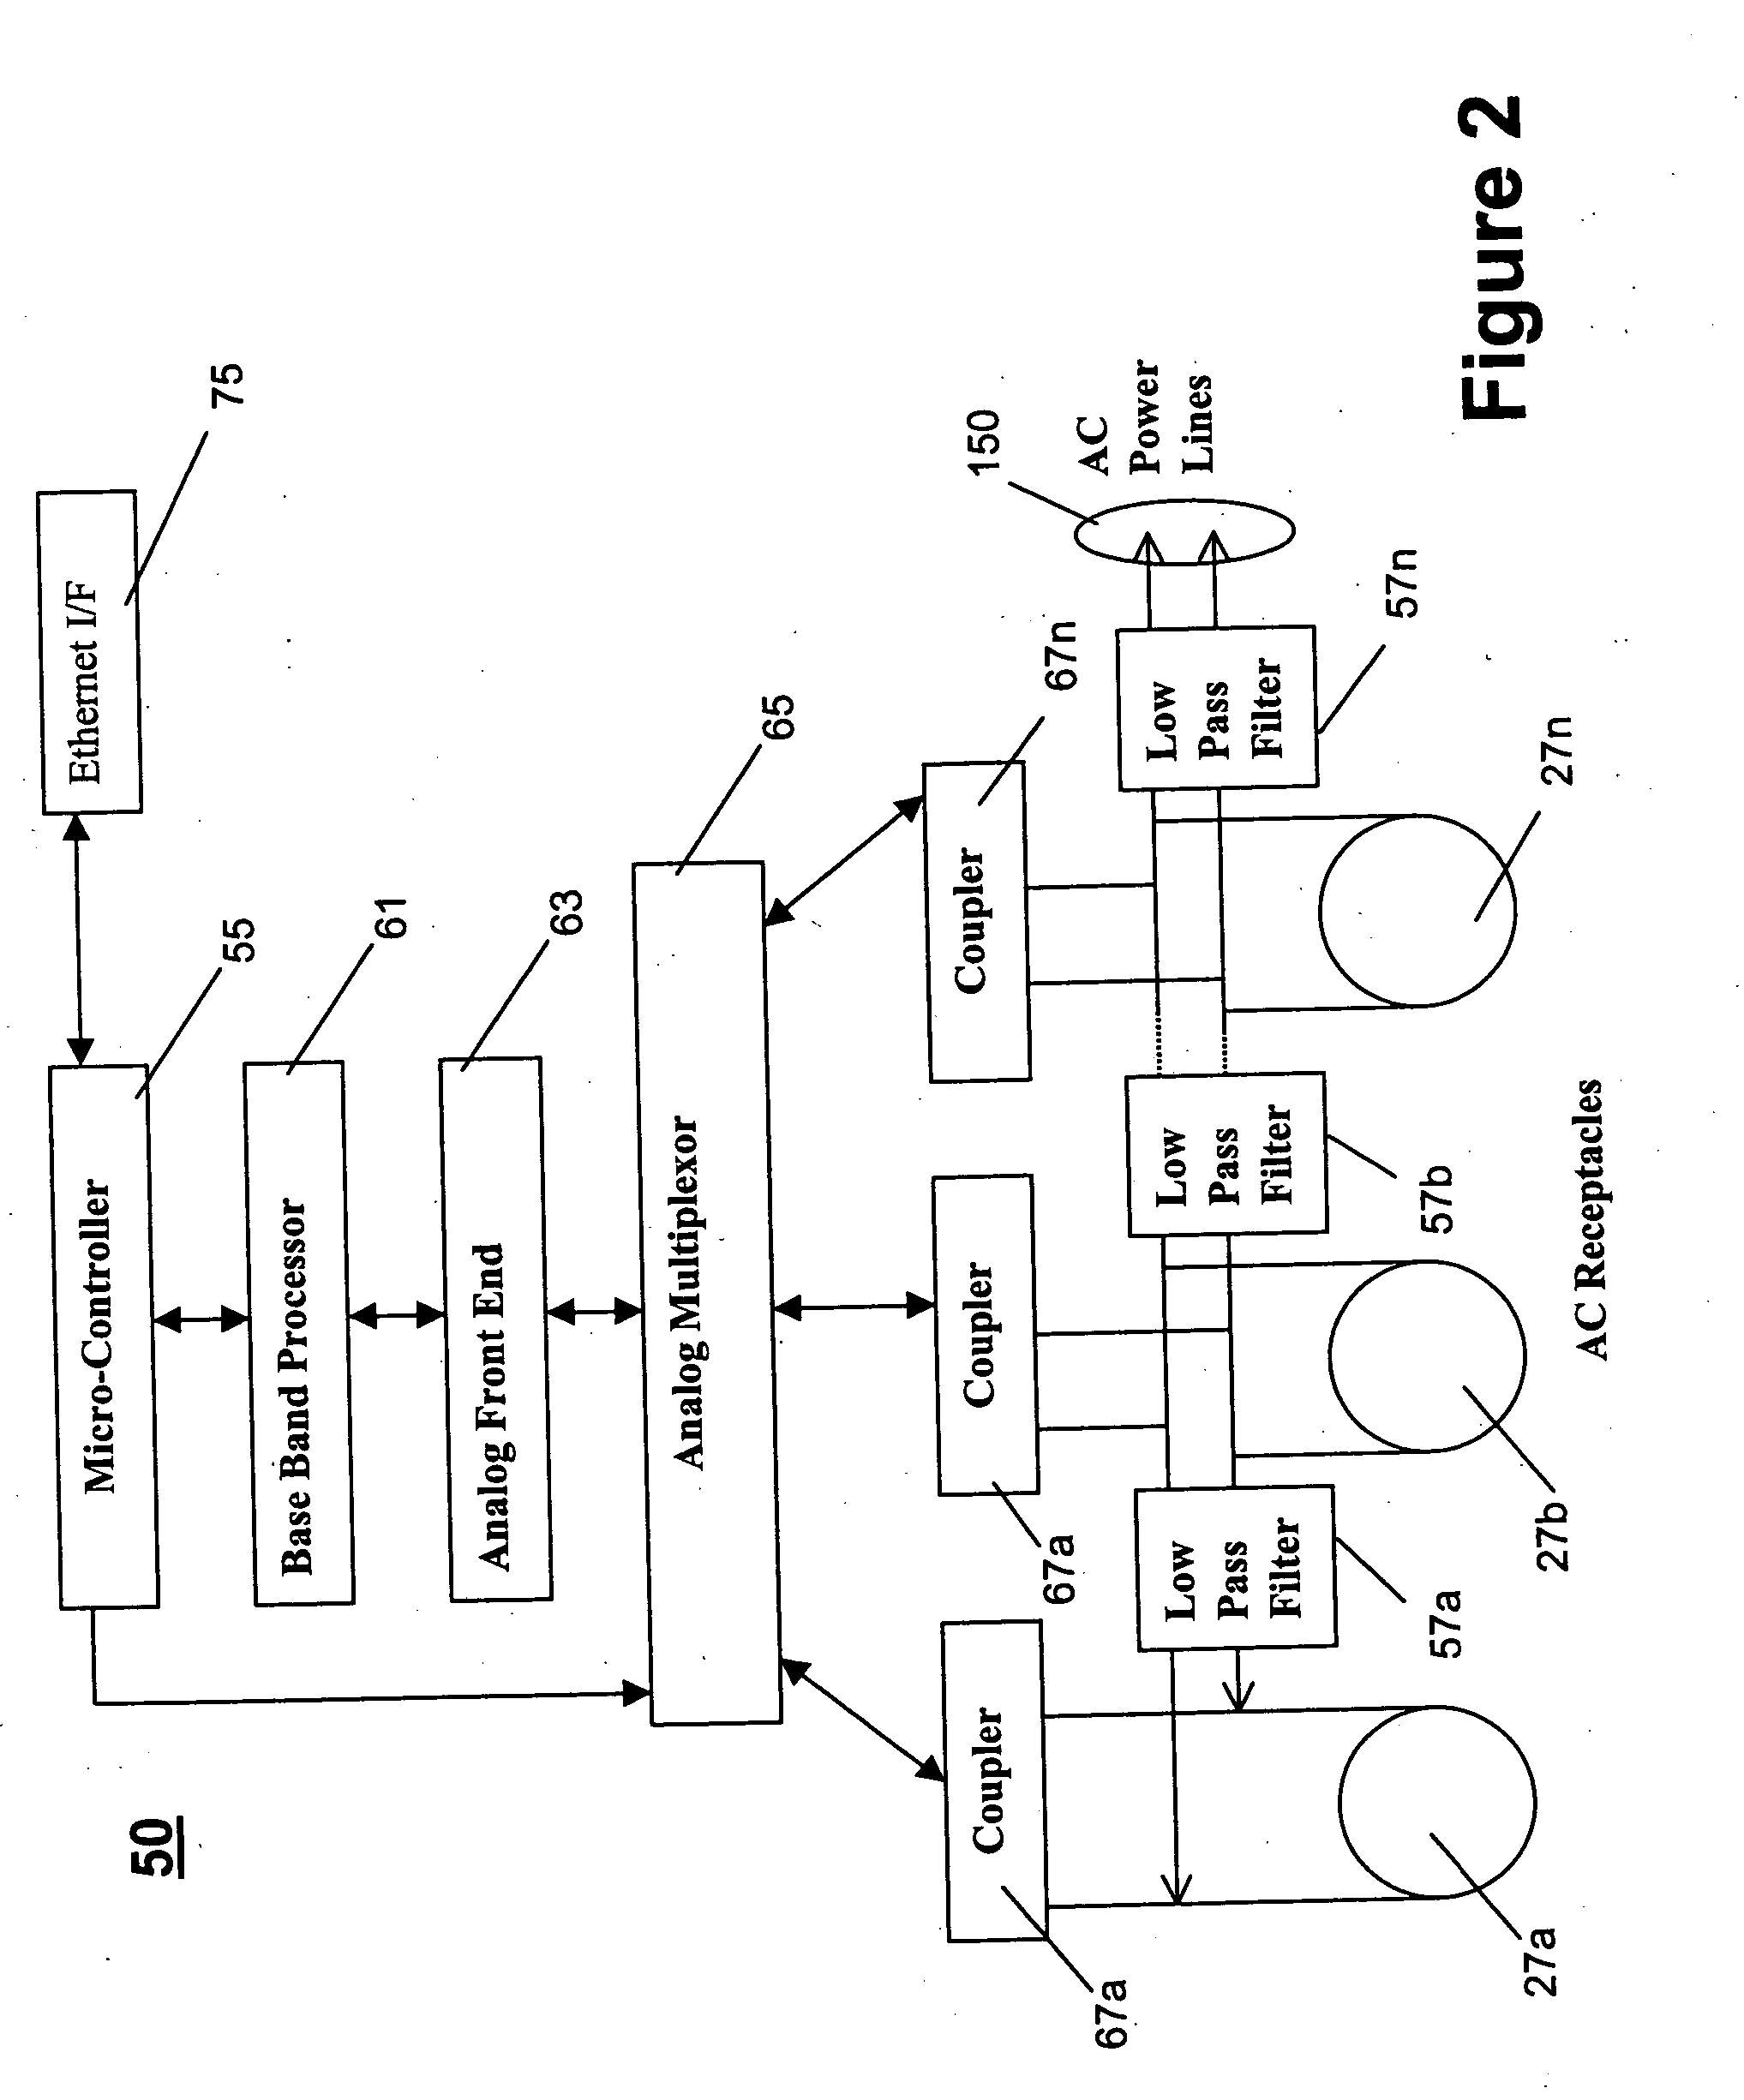 Tracking system and method for electrically powered equipment